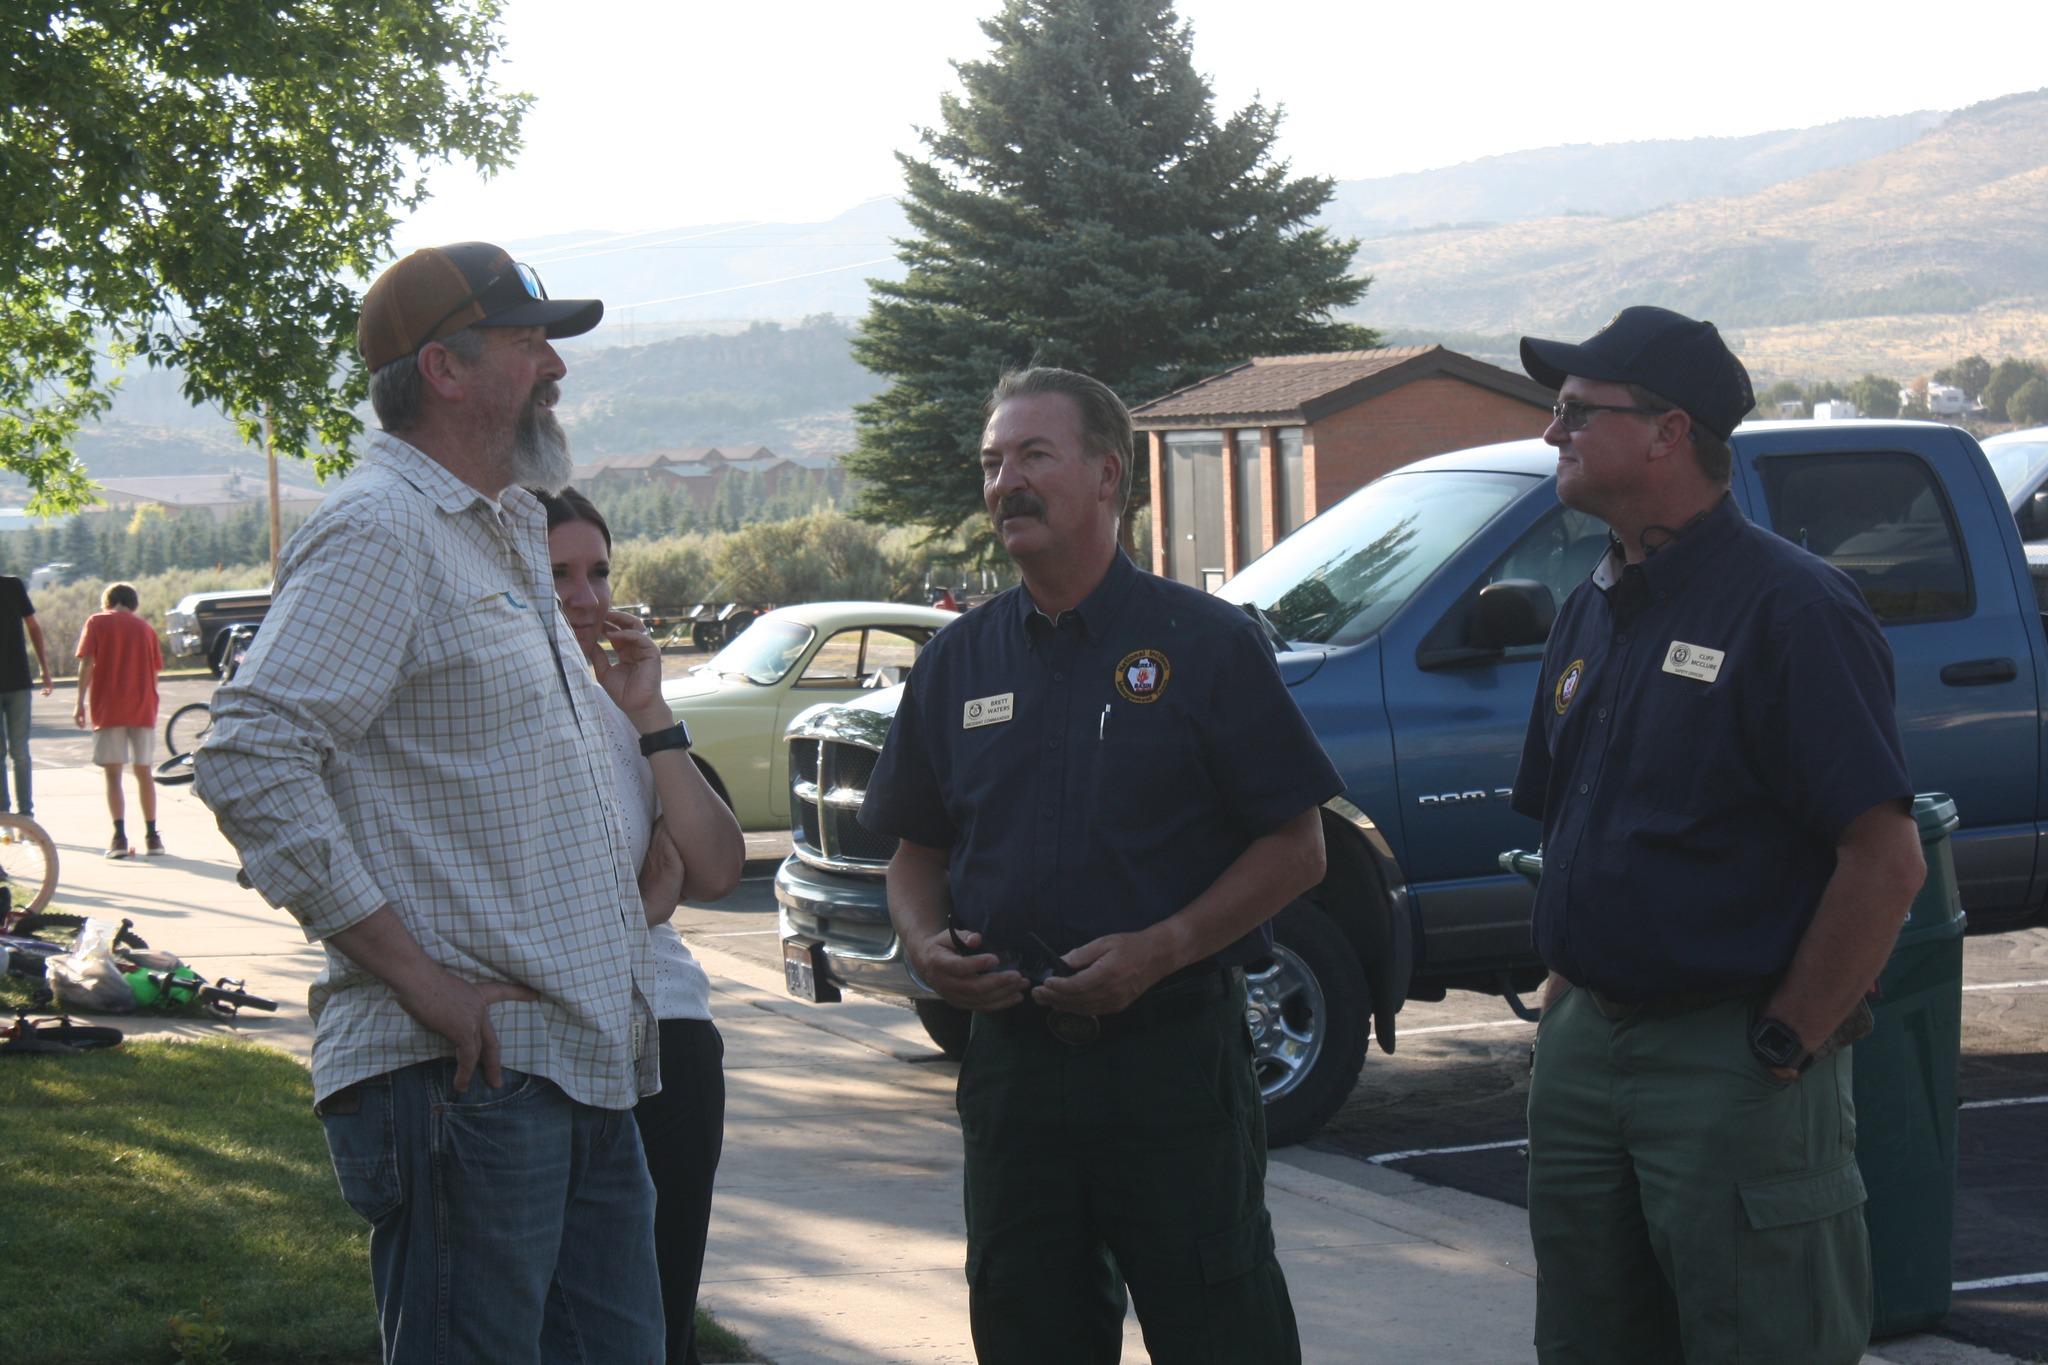 Incident Commander and Safety Officer talking to community member